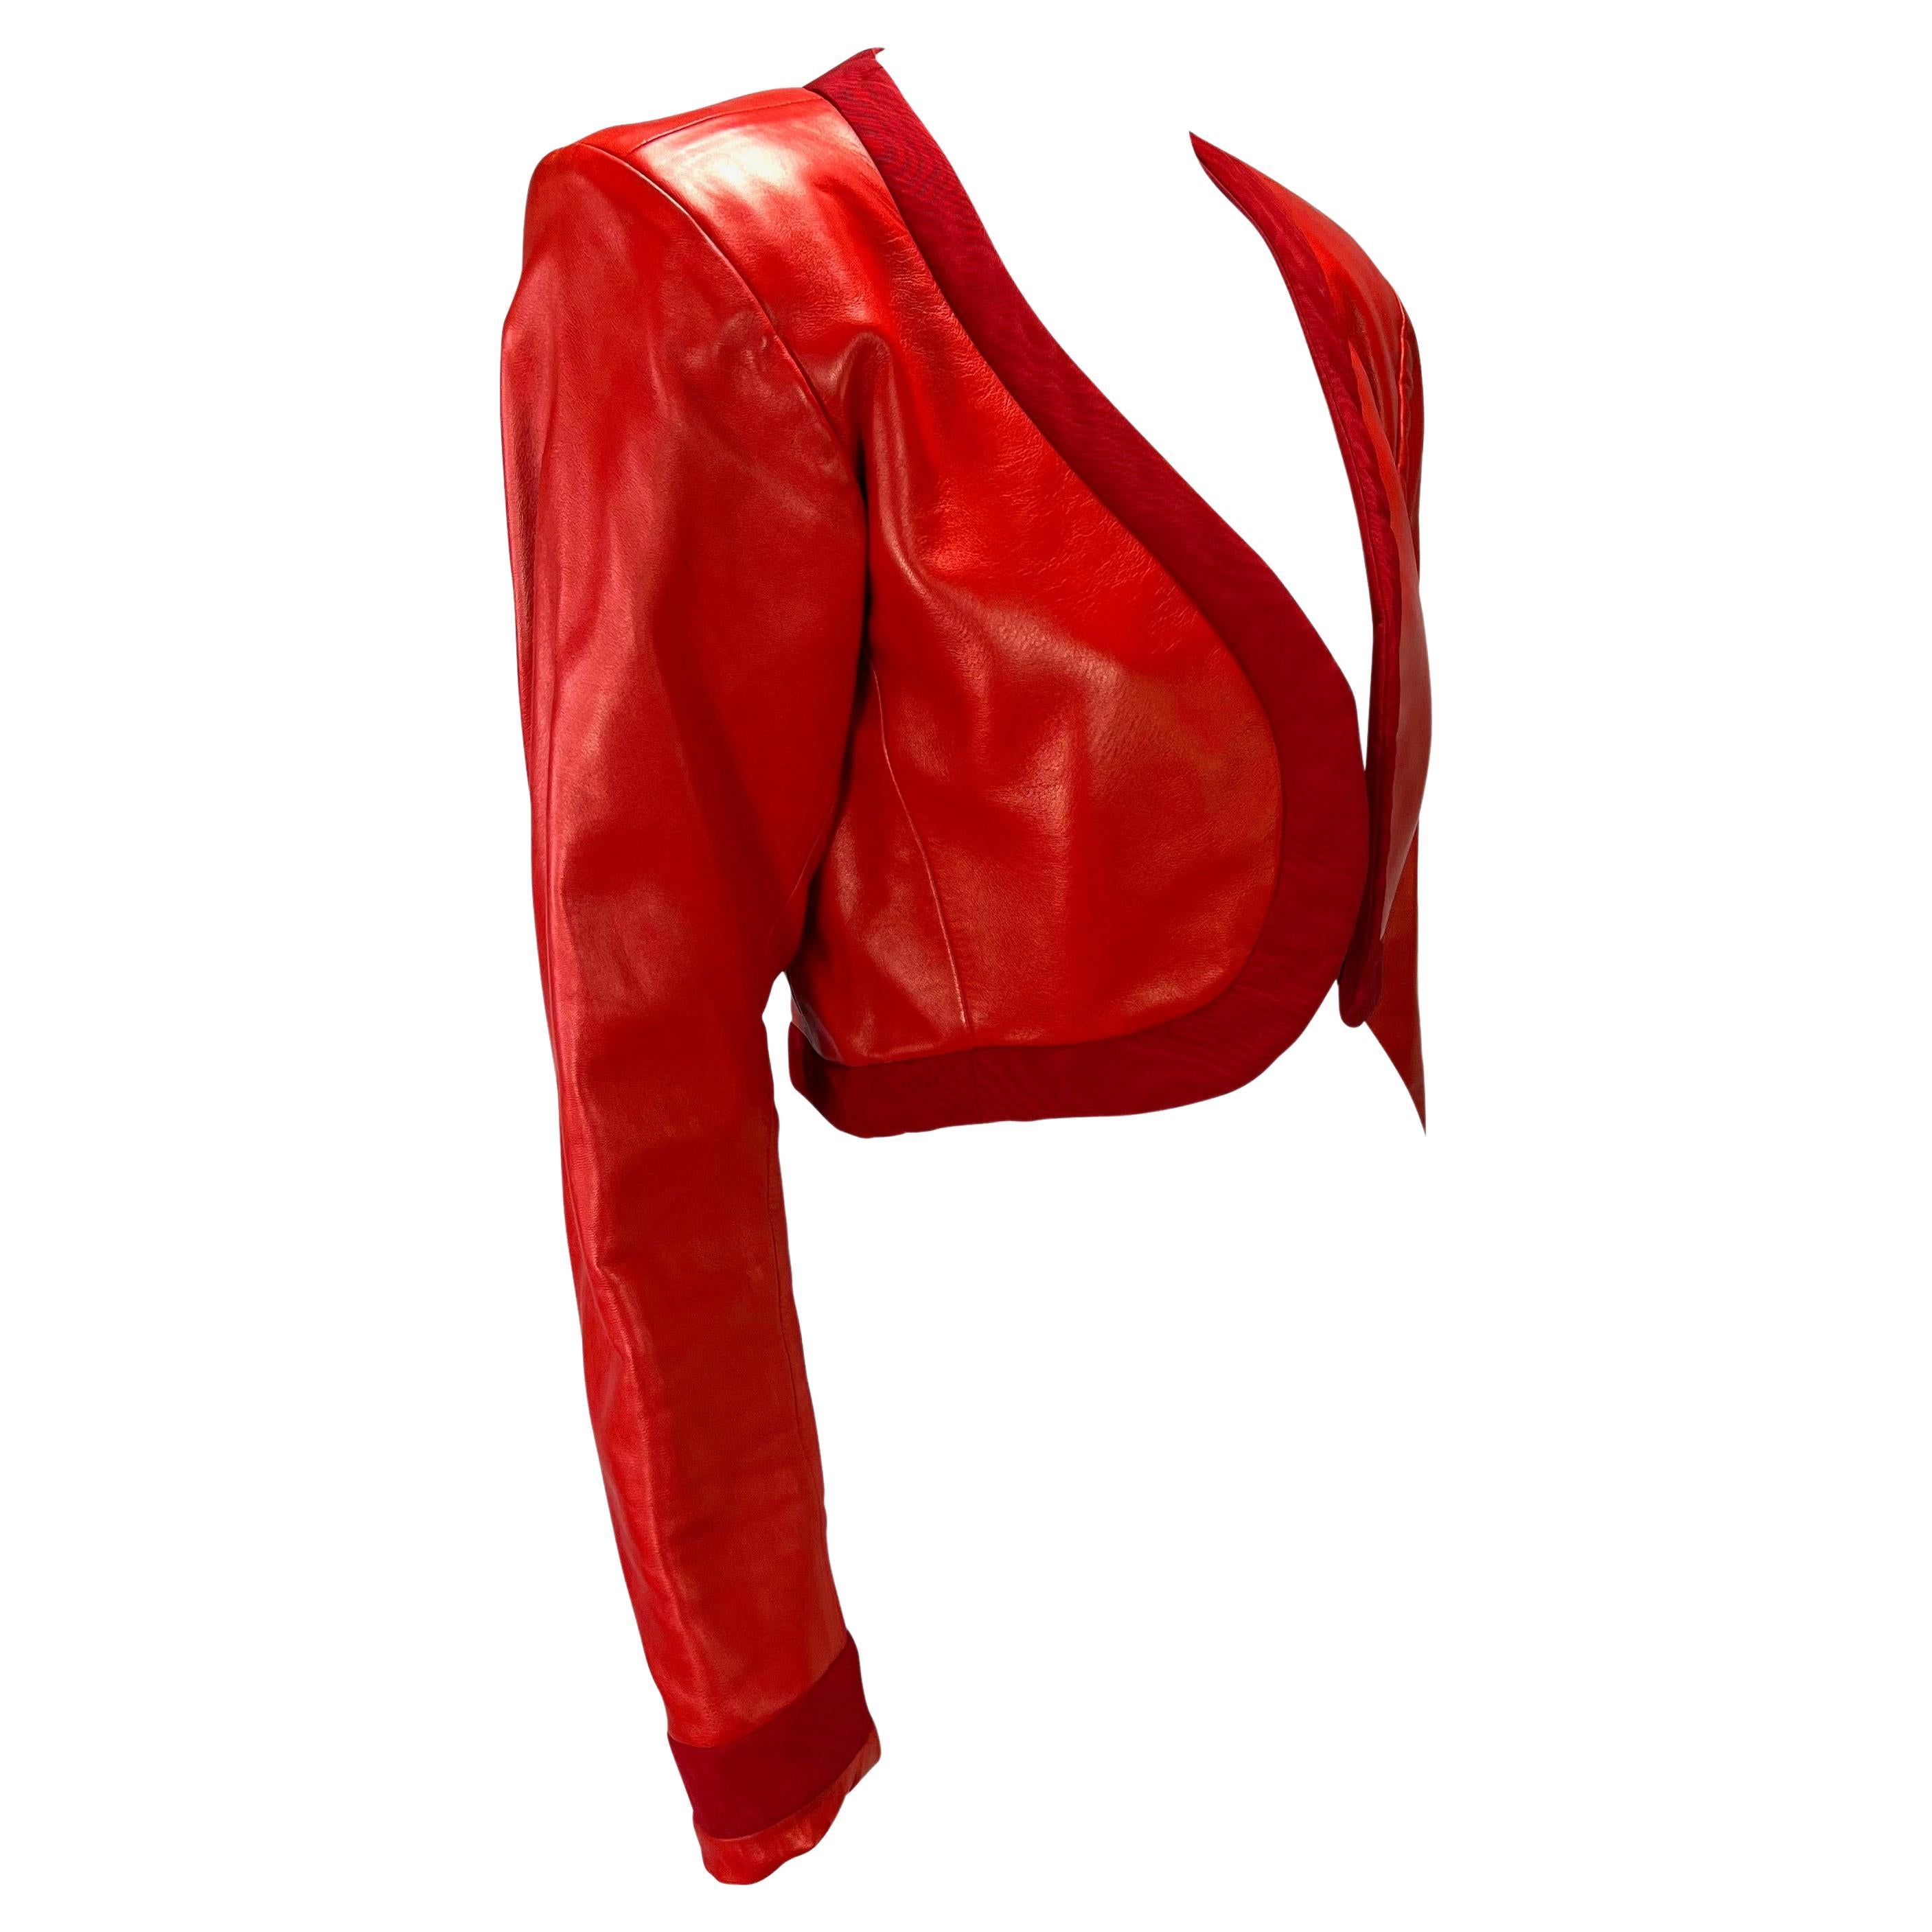 S/S 1990 Yves Saint Laurent Rive Gauche Red Leather Cropped Bolero Jacket In Good Condition For Sale In West Hollywood, CA